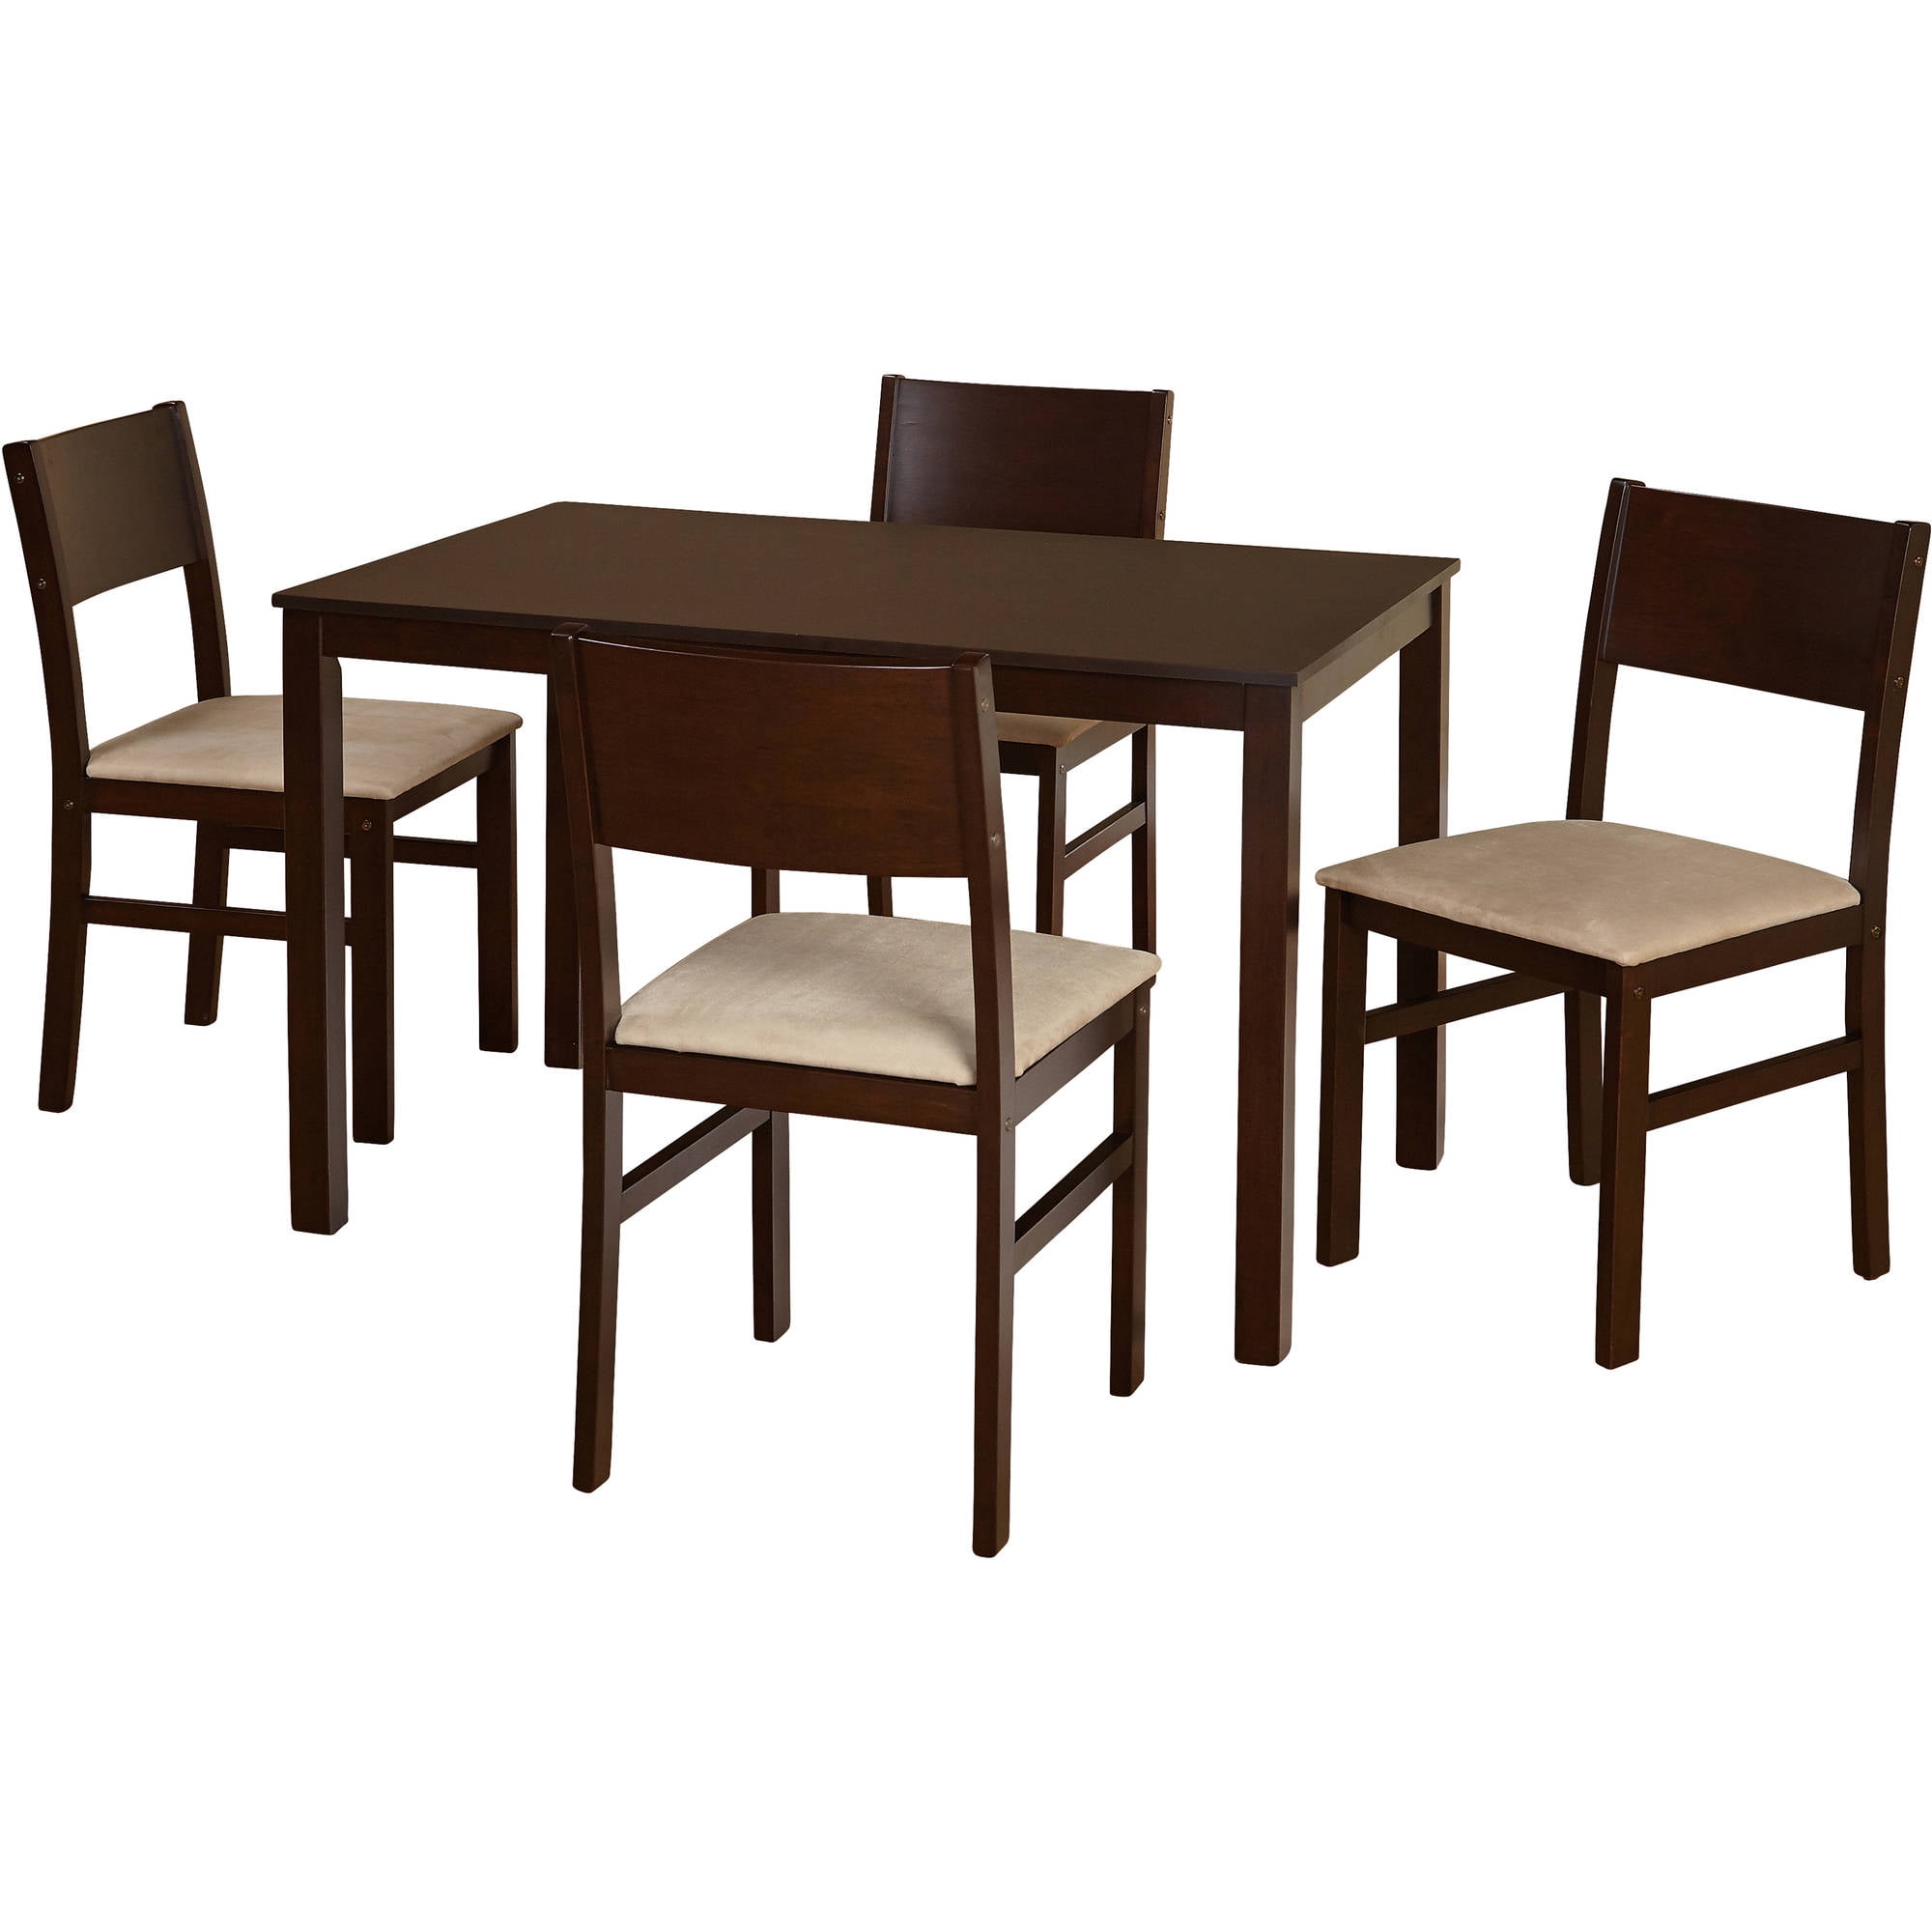 Tms Lucca 5 Piece Dining Set